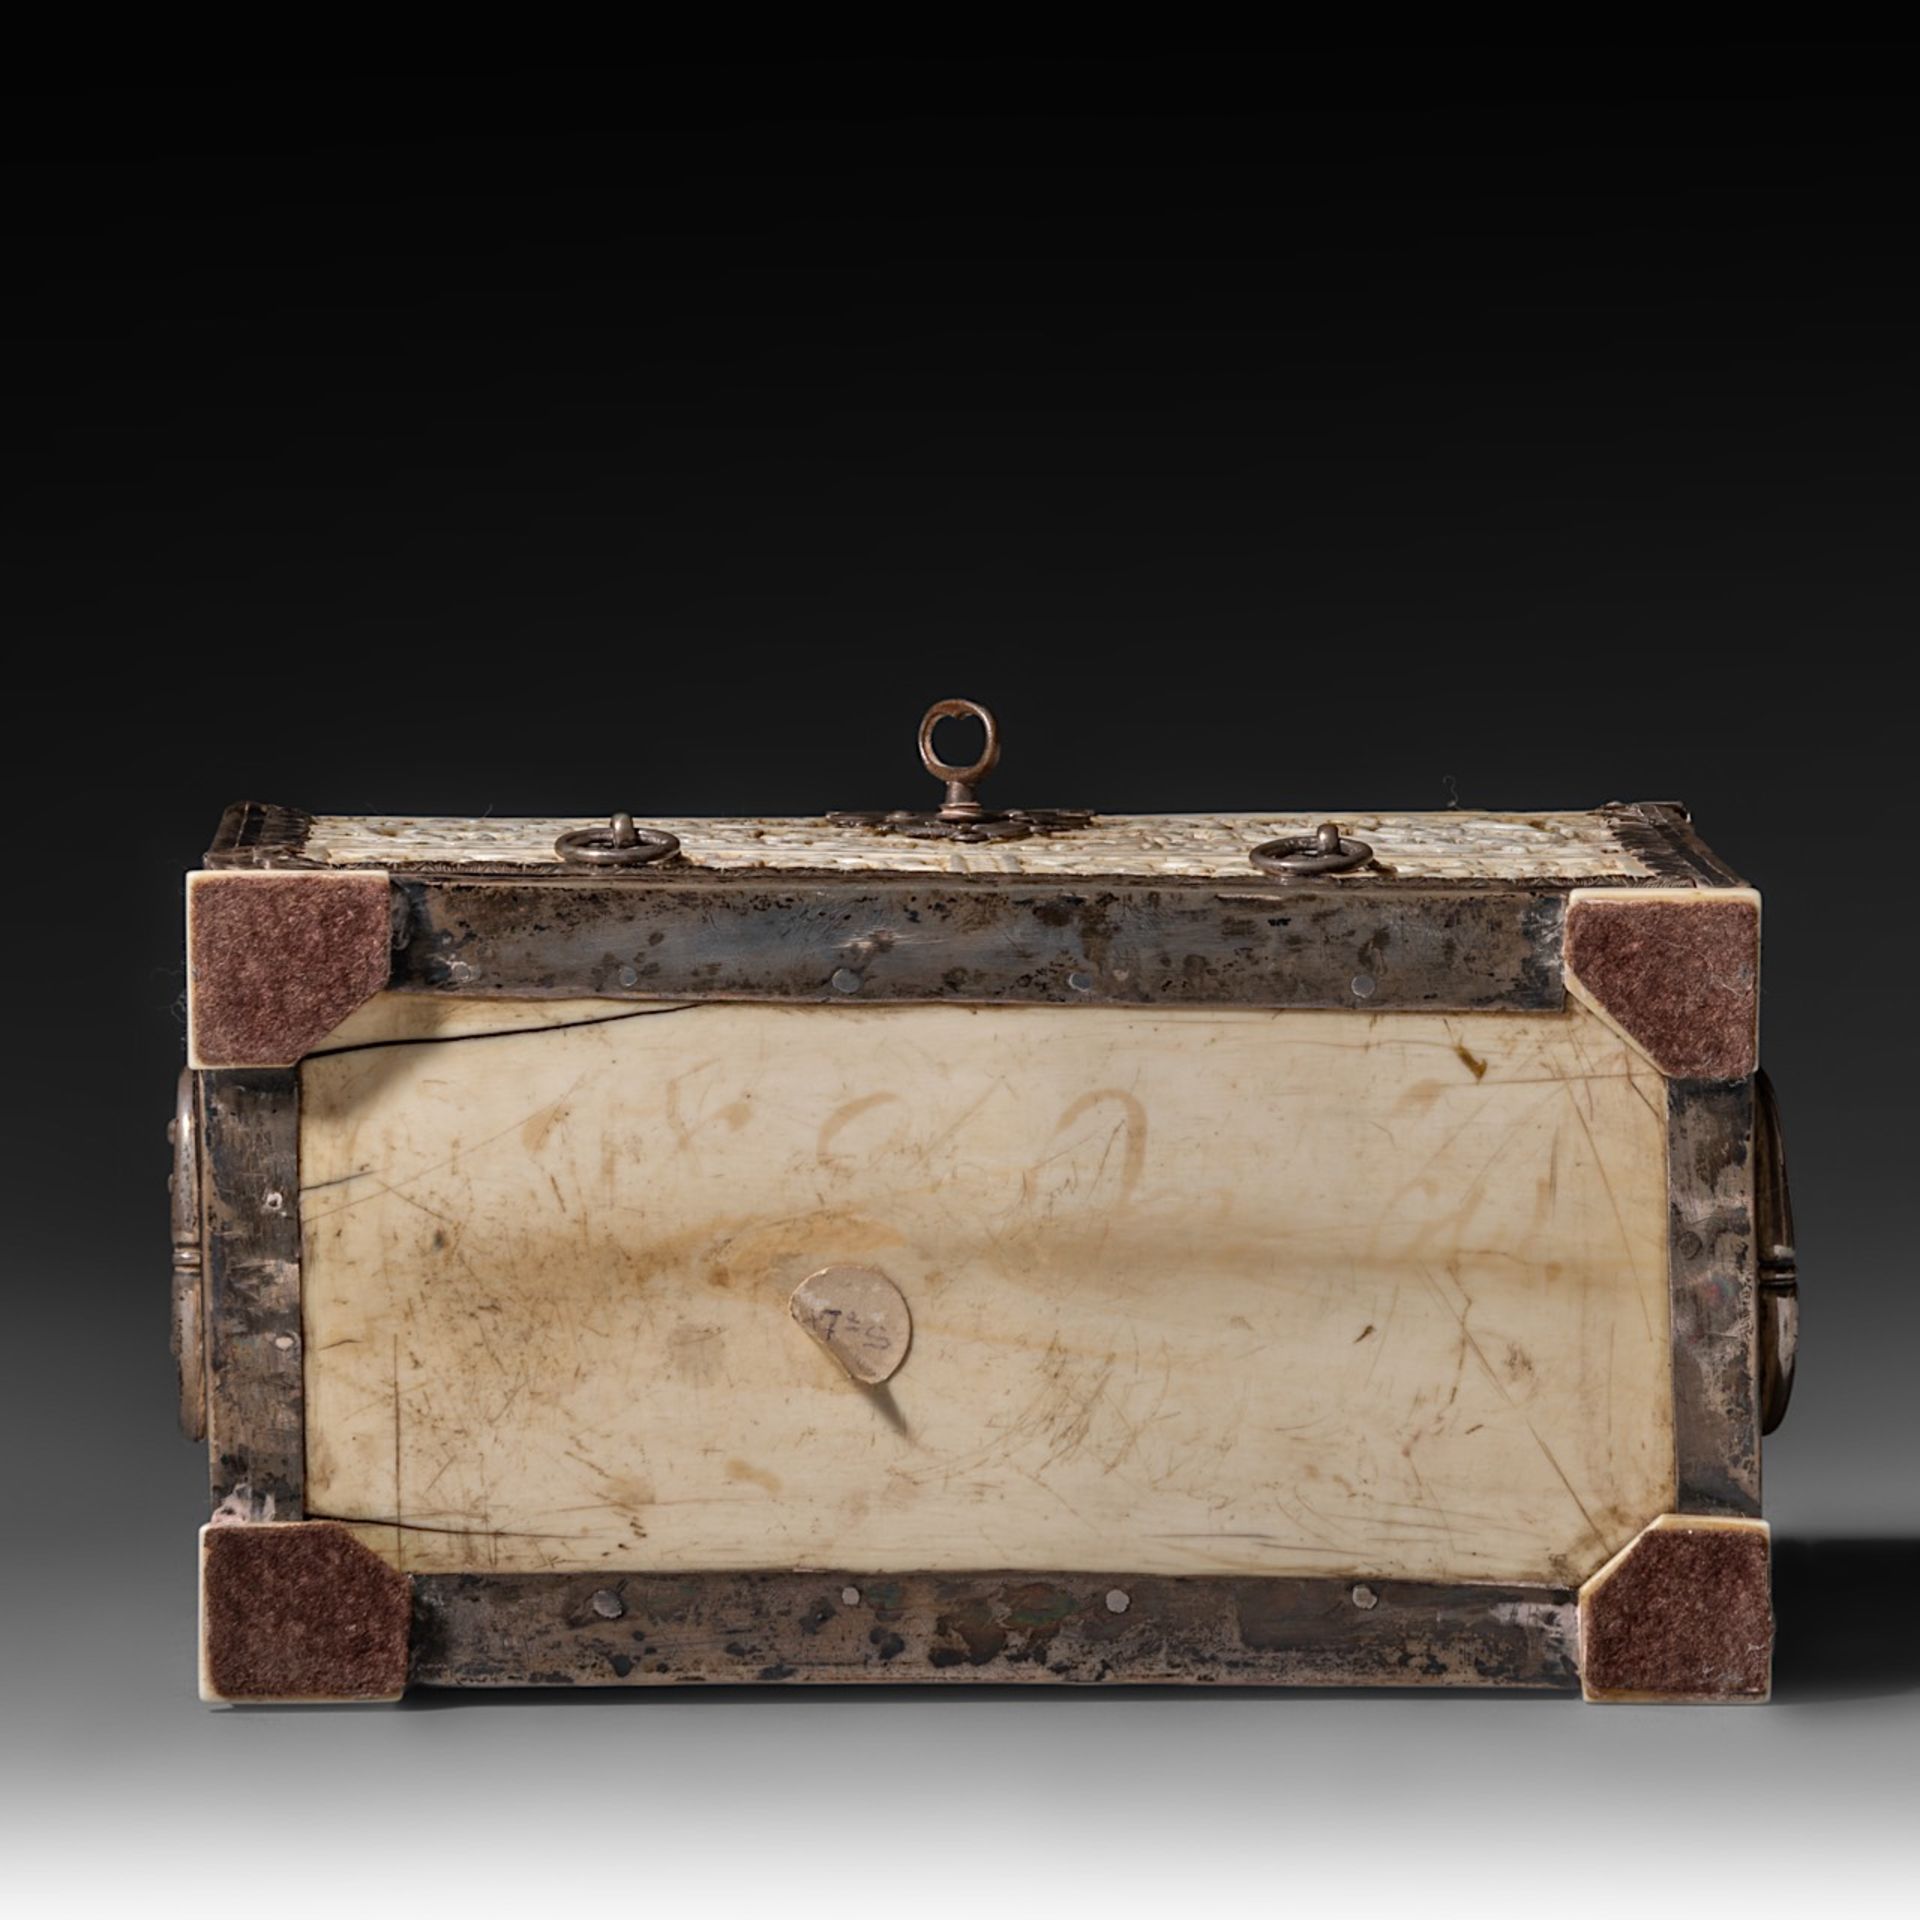 A 17th/18th-century Sinhalese (Sri Lanka) ivory jewelry casket, H 13,5 - W 19,3 - D 10,1 cm / total - Image 8 of 11